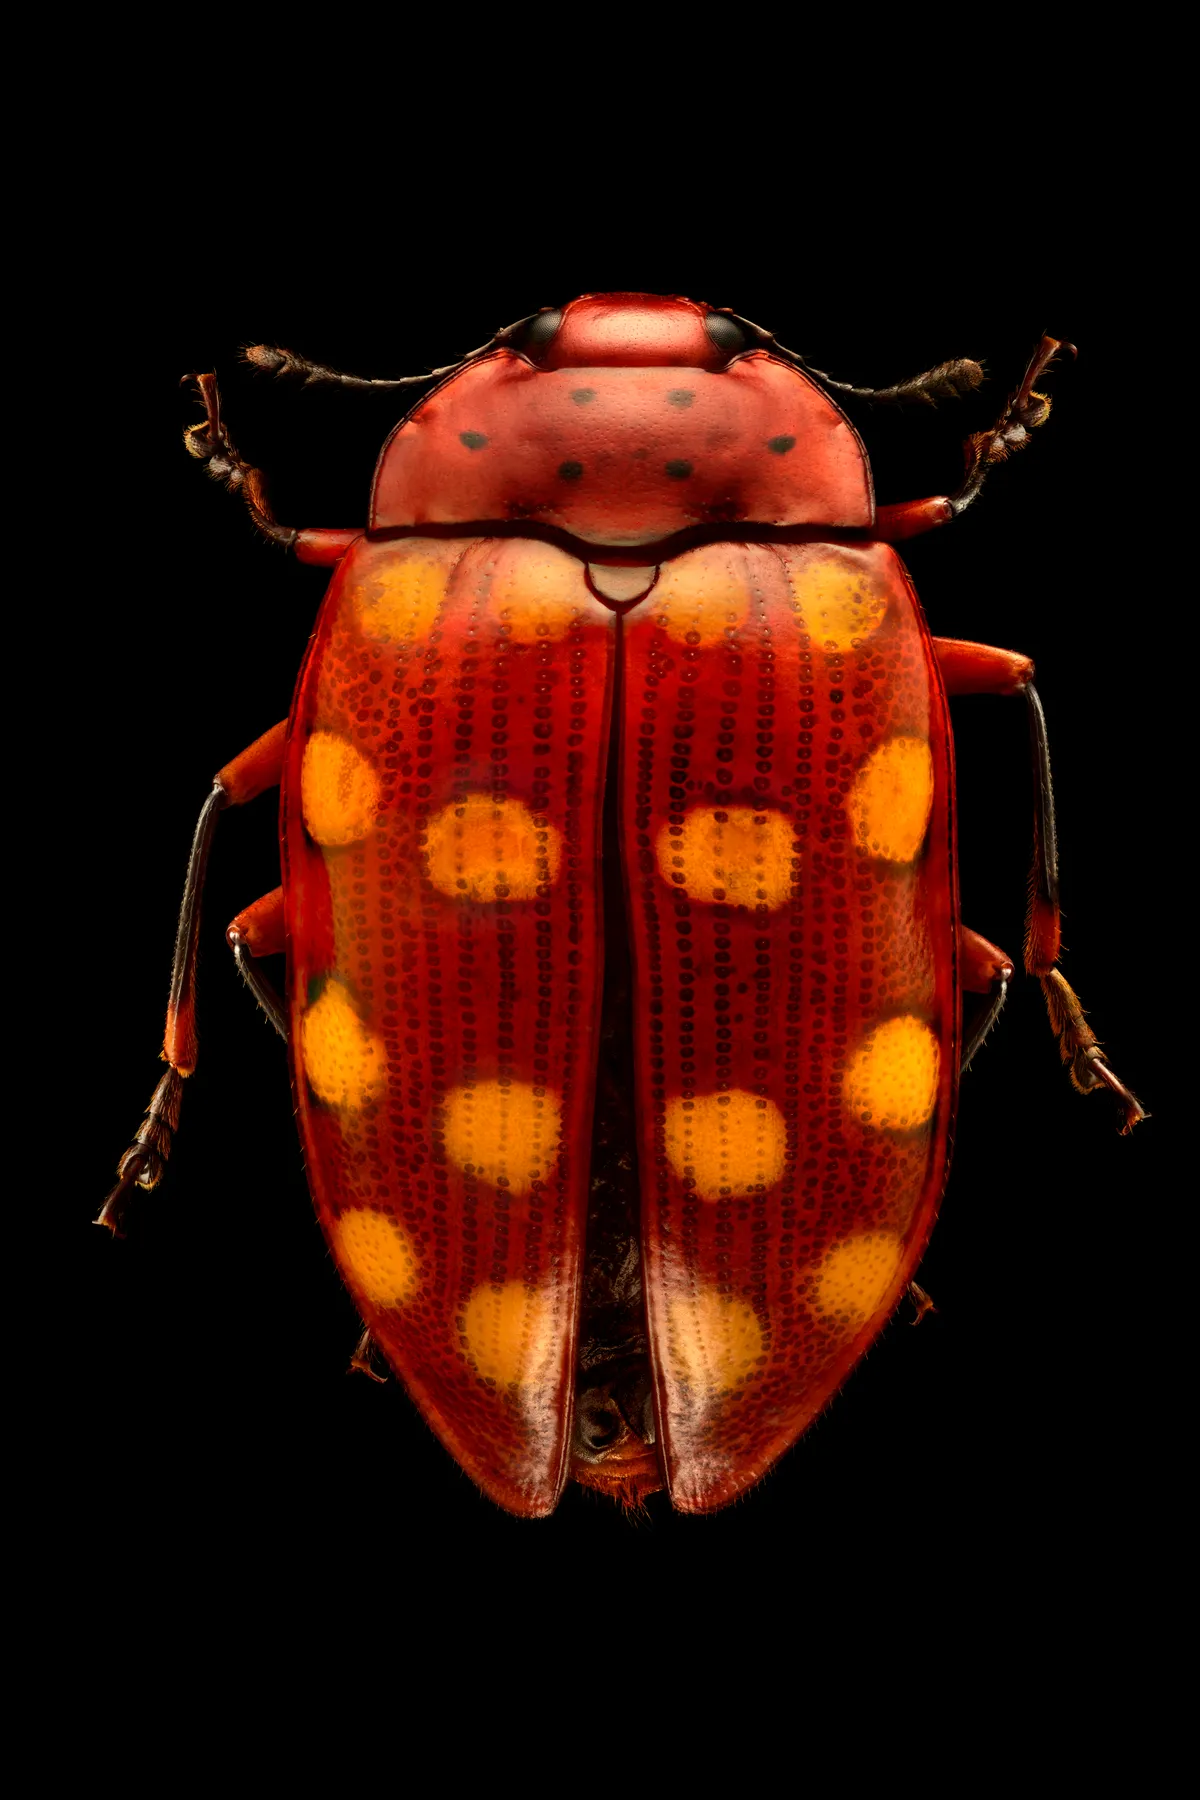 Pleasing fungus beetle. Close relatives of the ladybugs, pleasing fungus beetles often have conspicuous markings in various combinations of bright colours, spots, stripes, and other patterns. © Levon Biss